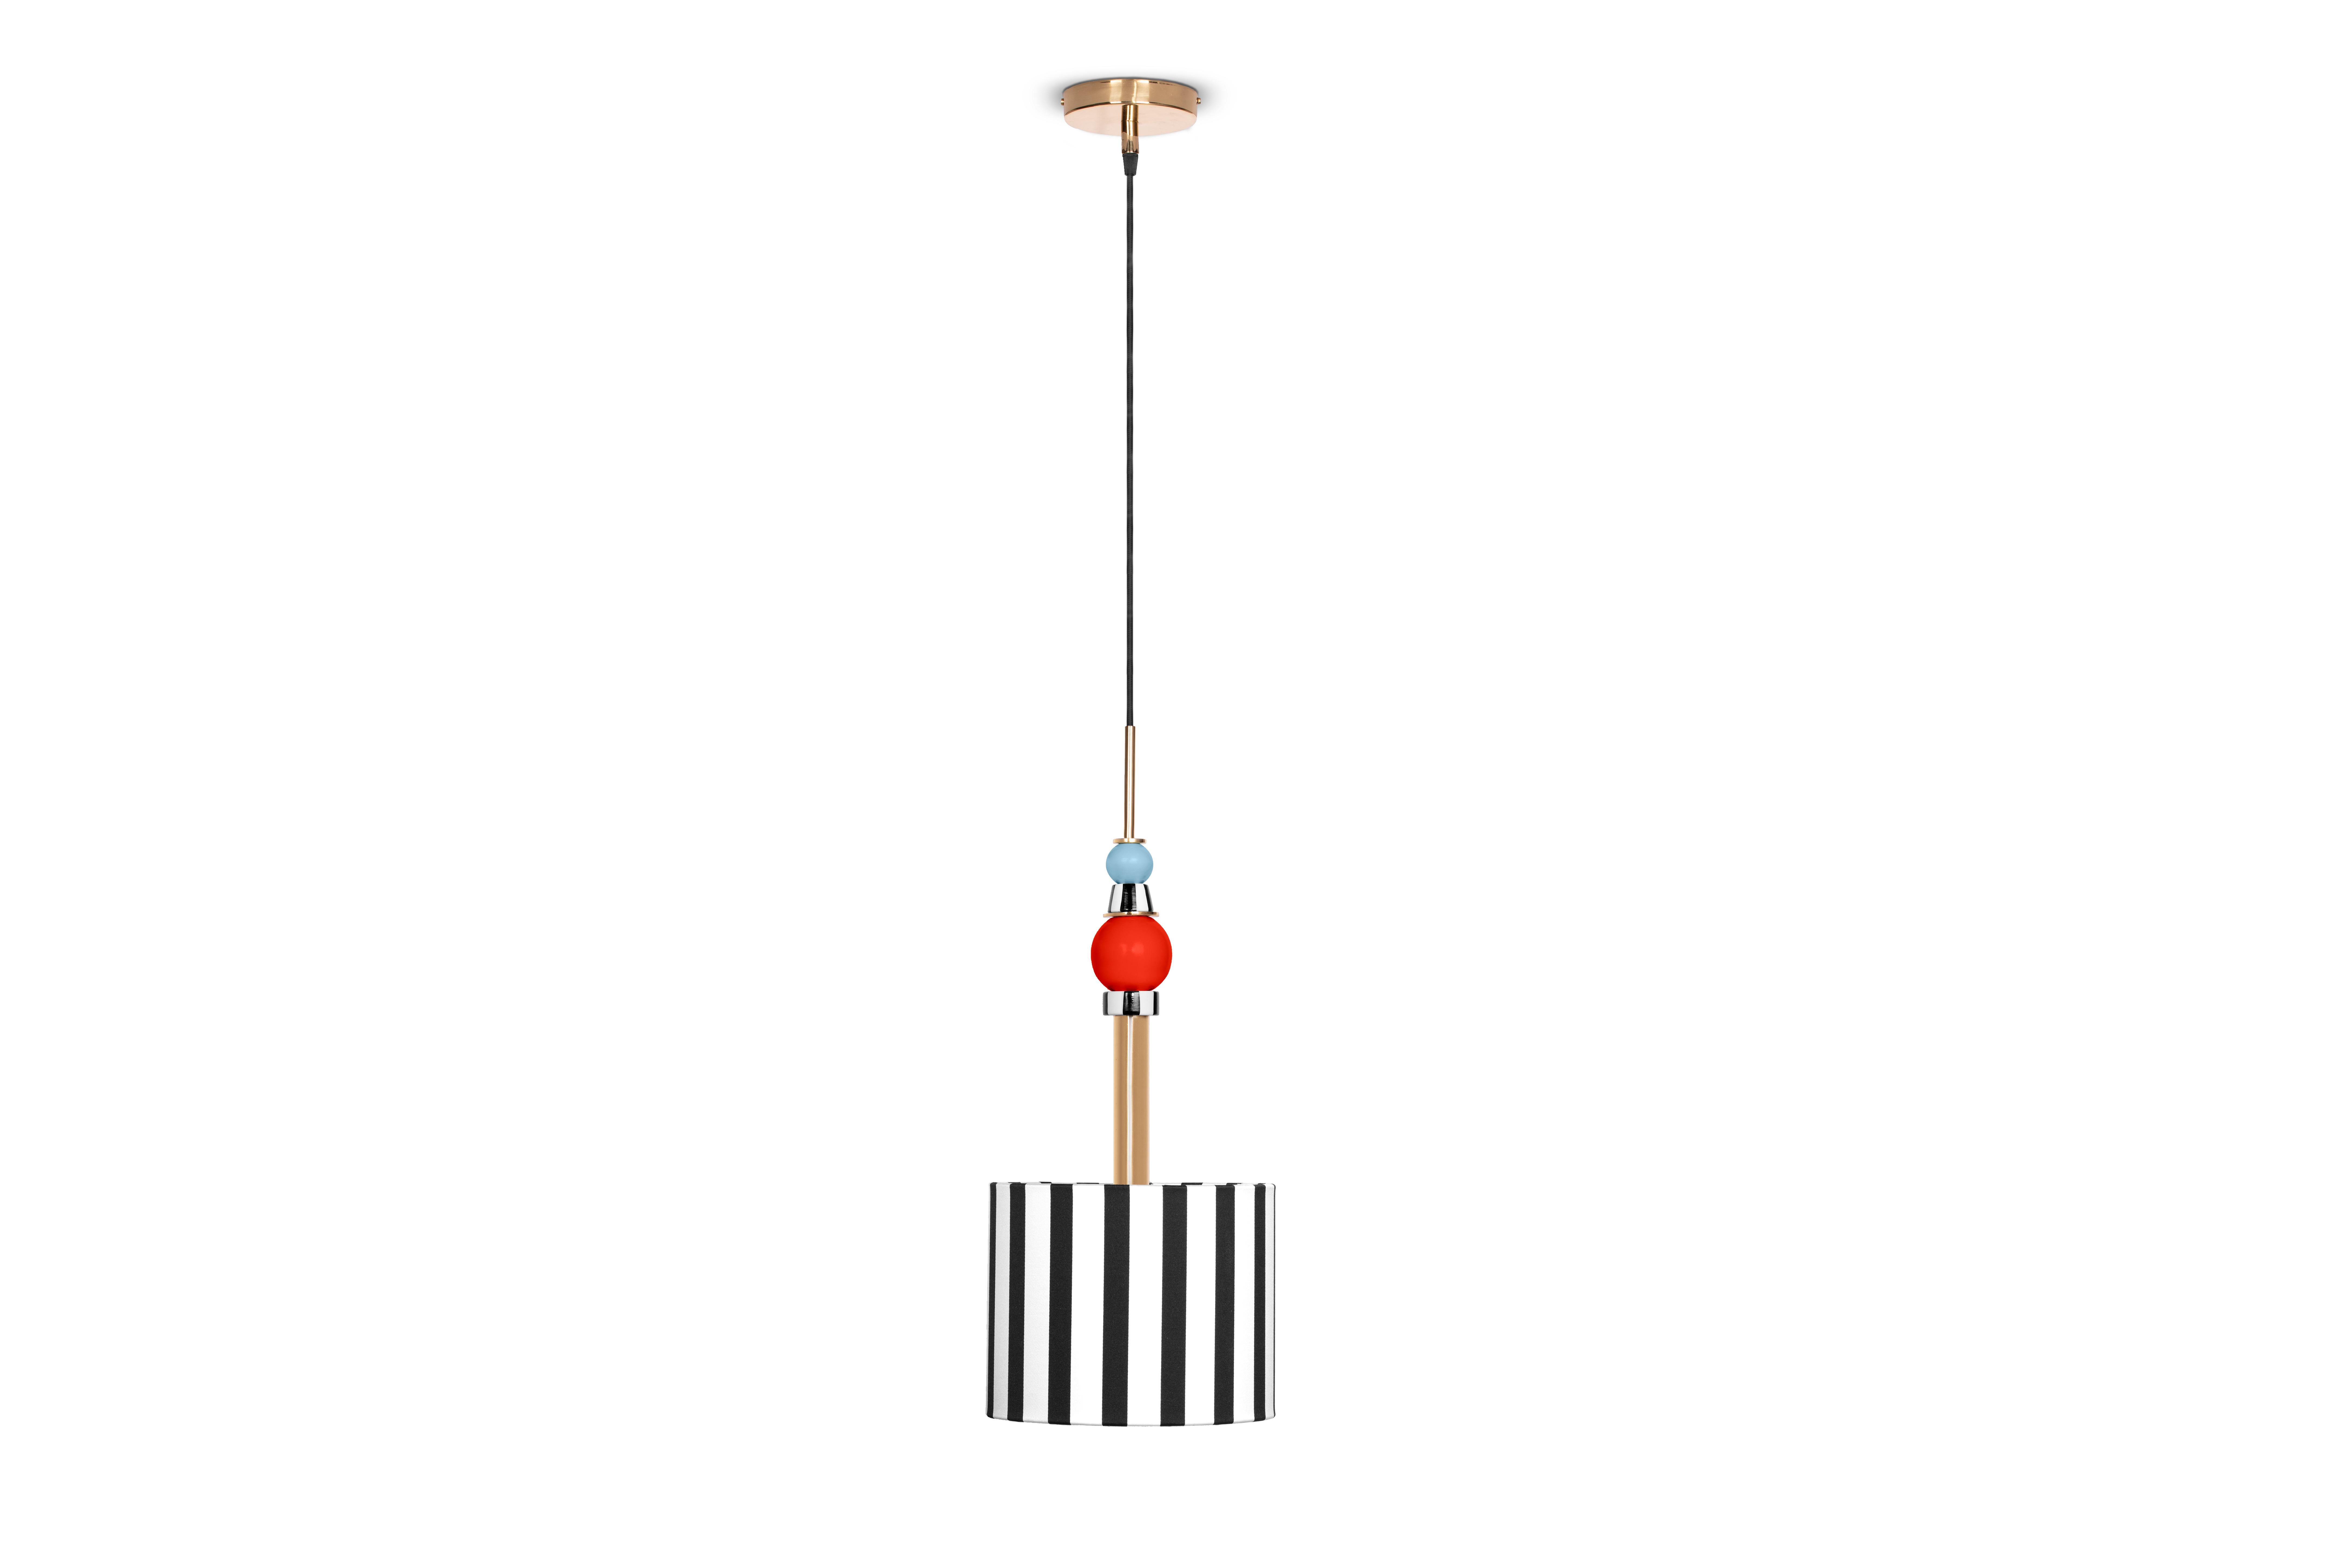 Alice ceiling lamp, Royal Stranger
Dimensions
Width 25cm, height 62cm (without cable) depth 25cm

Metals
Brass, copper or stainless steel in polished or brushed finish.

Inspired by the femininity and using bold and vibrant color schemes, this